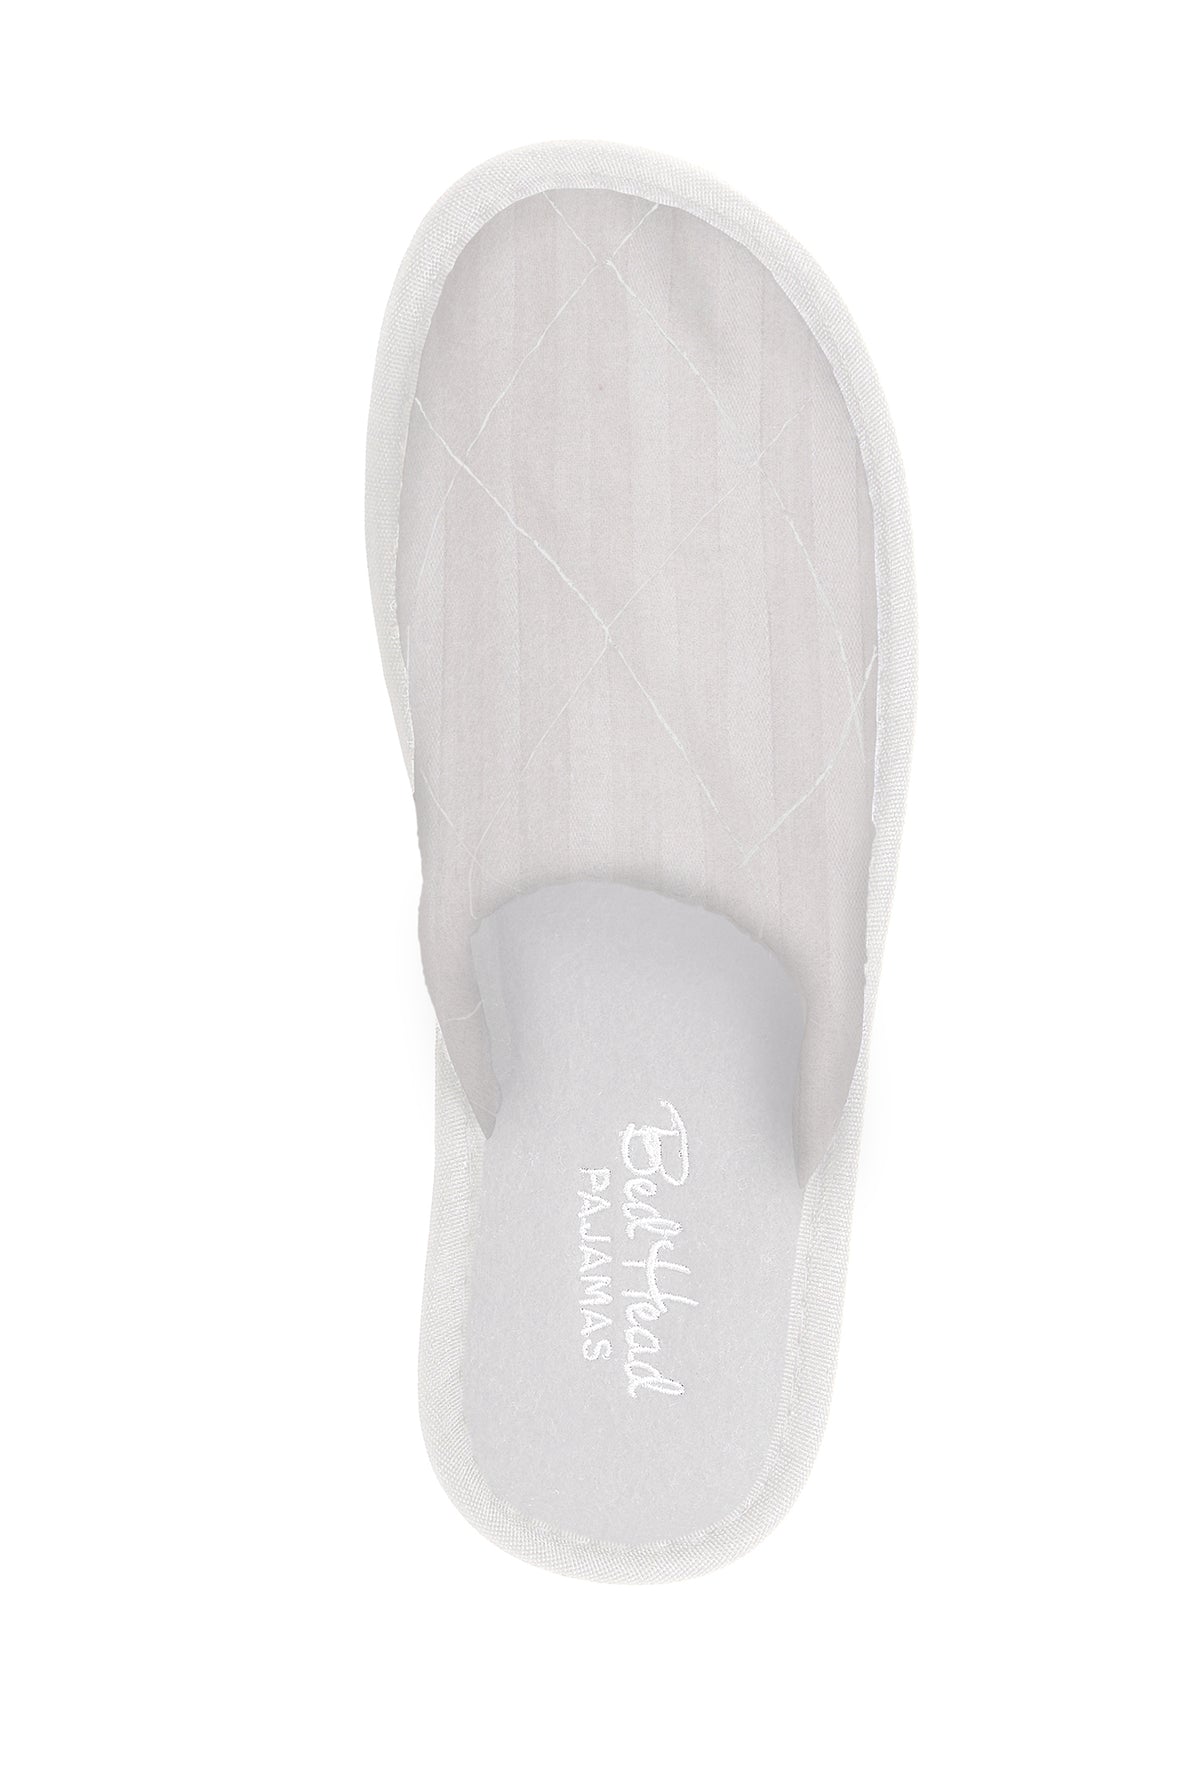 A White 3D Stripe French Terry Lined Woven Cotton Unisex Slippers